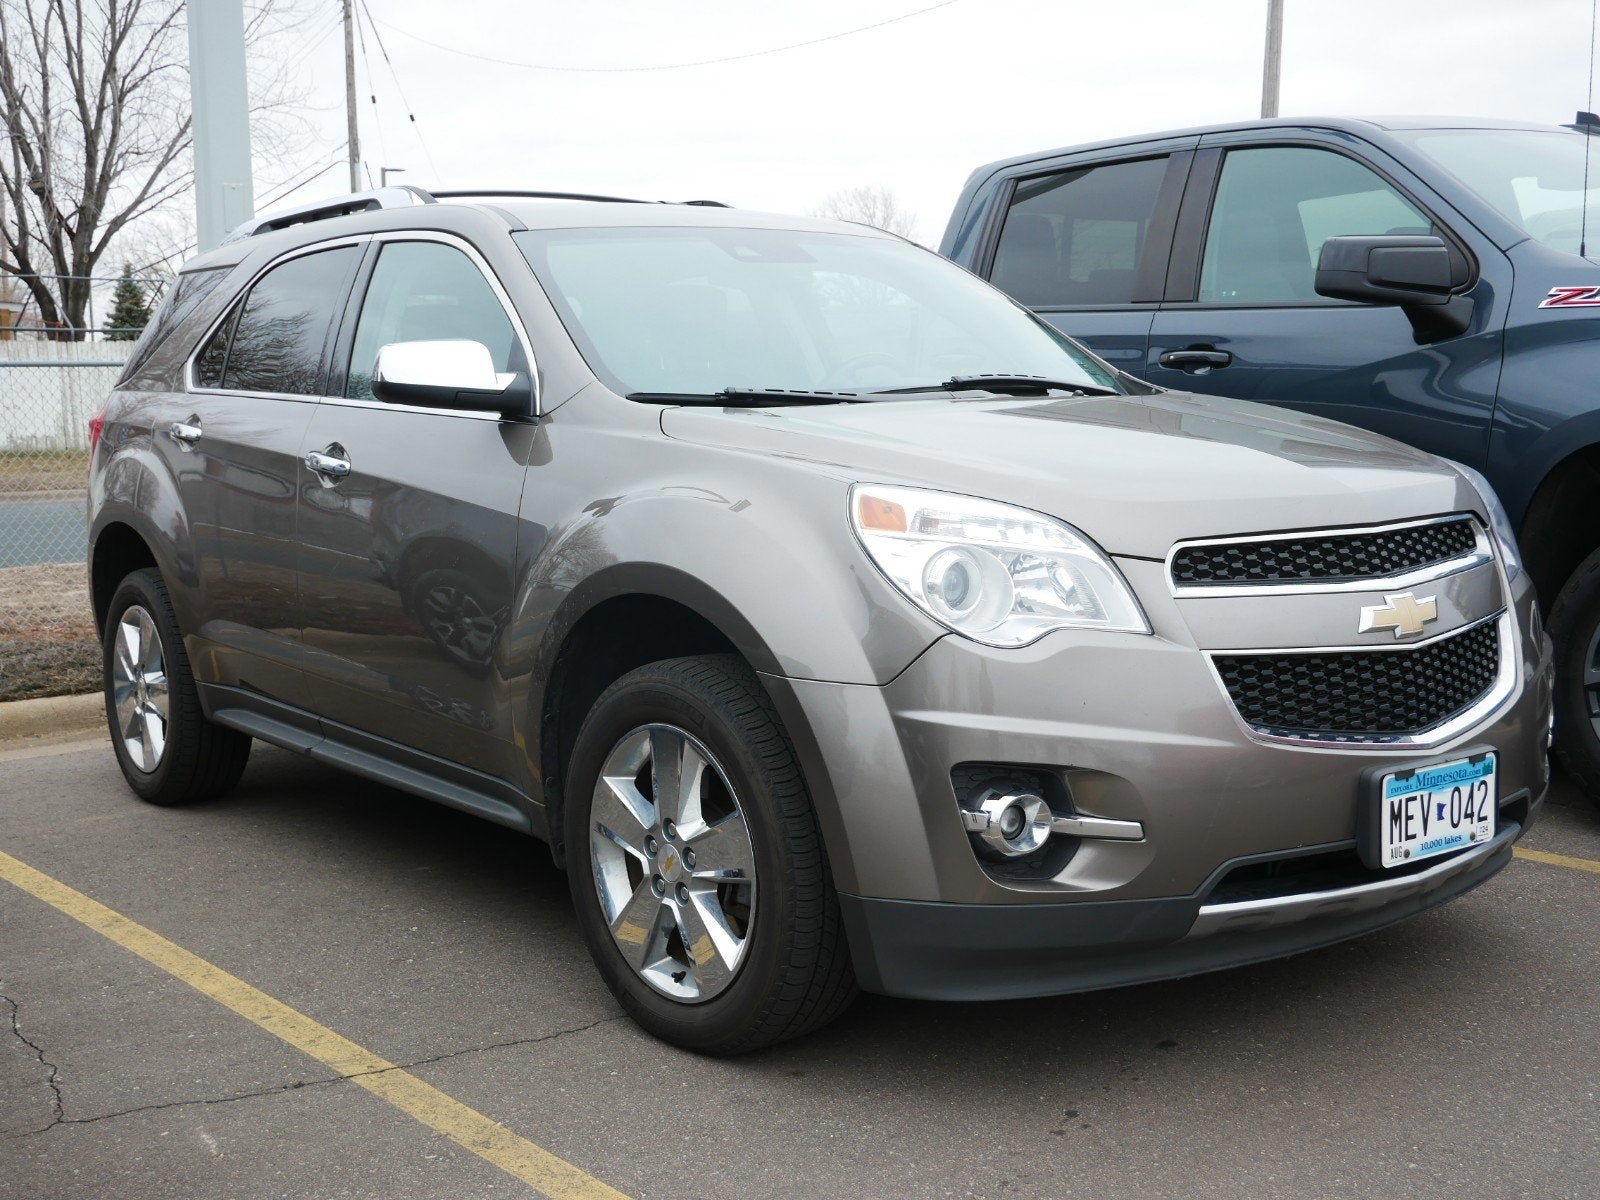 Used 2012 Chevrolet Equinox LTZ with VIN 2GNFLGE56C6149367 for sale in Fridley, Minnesota